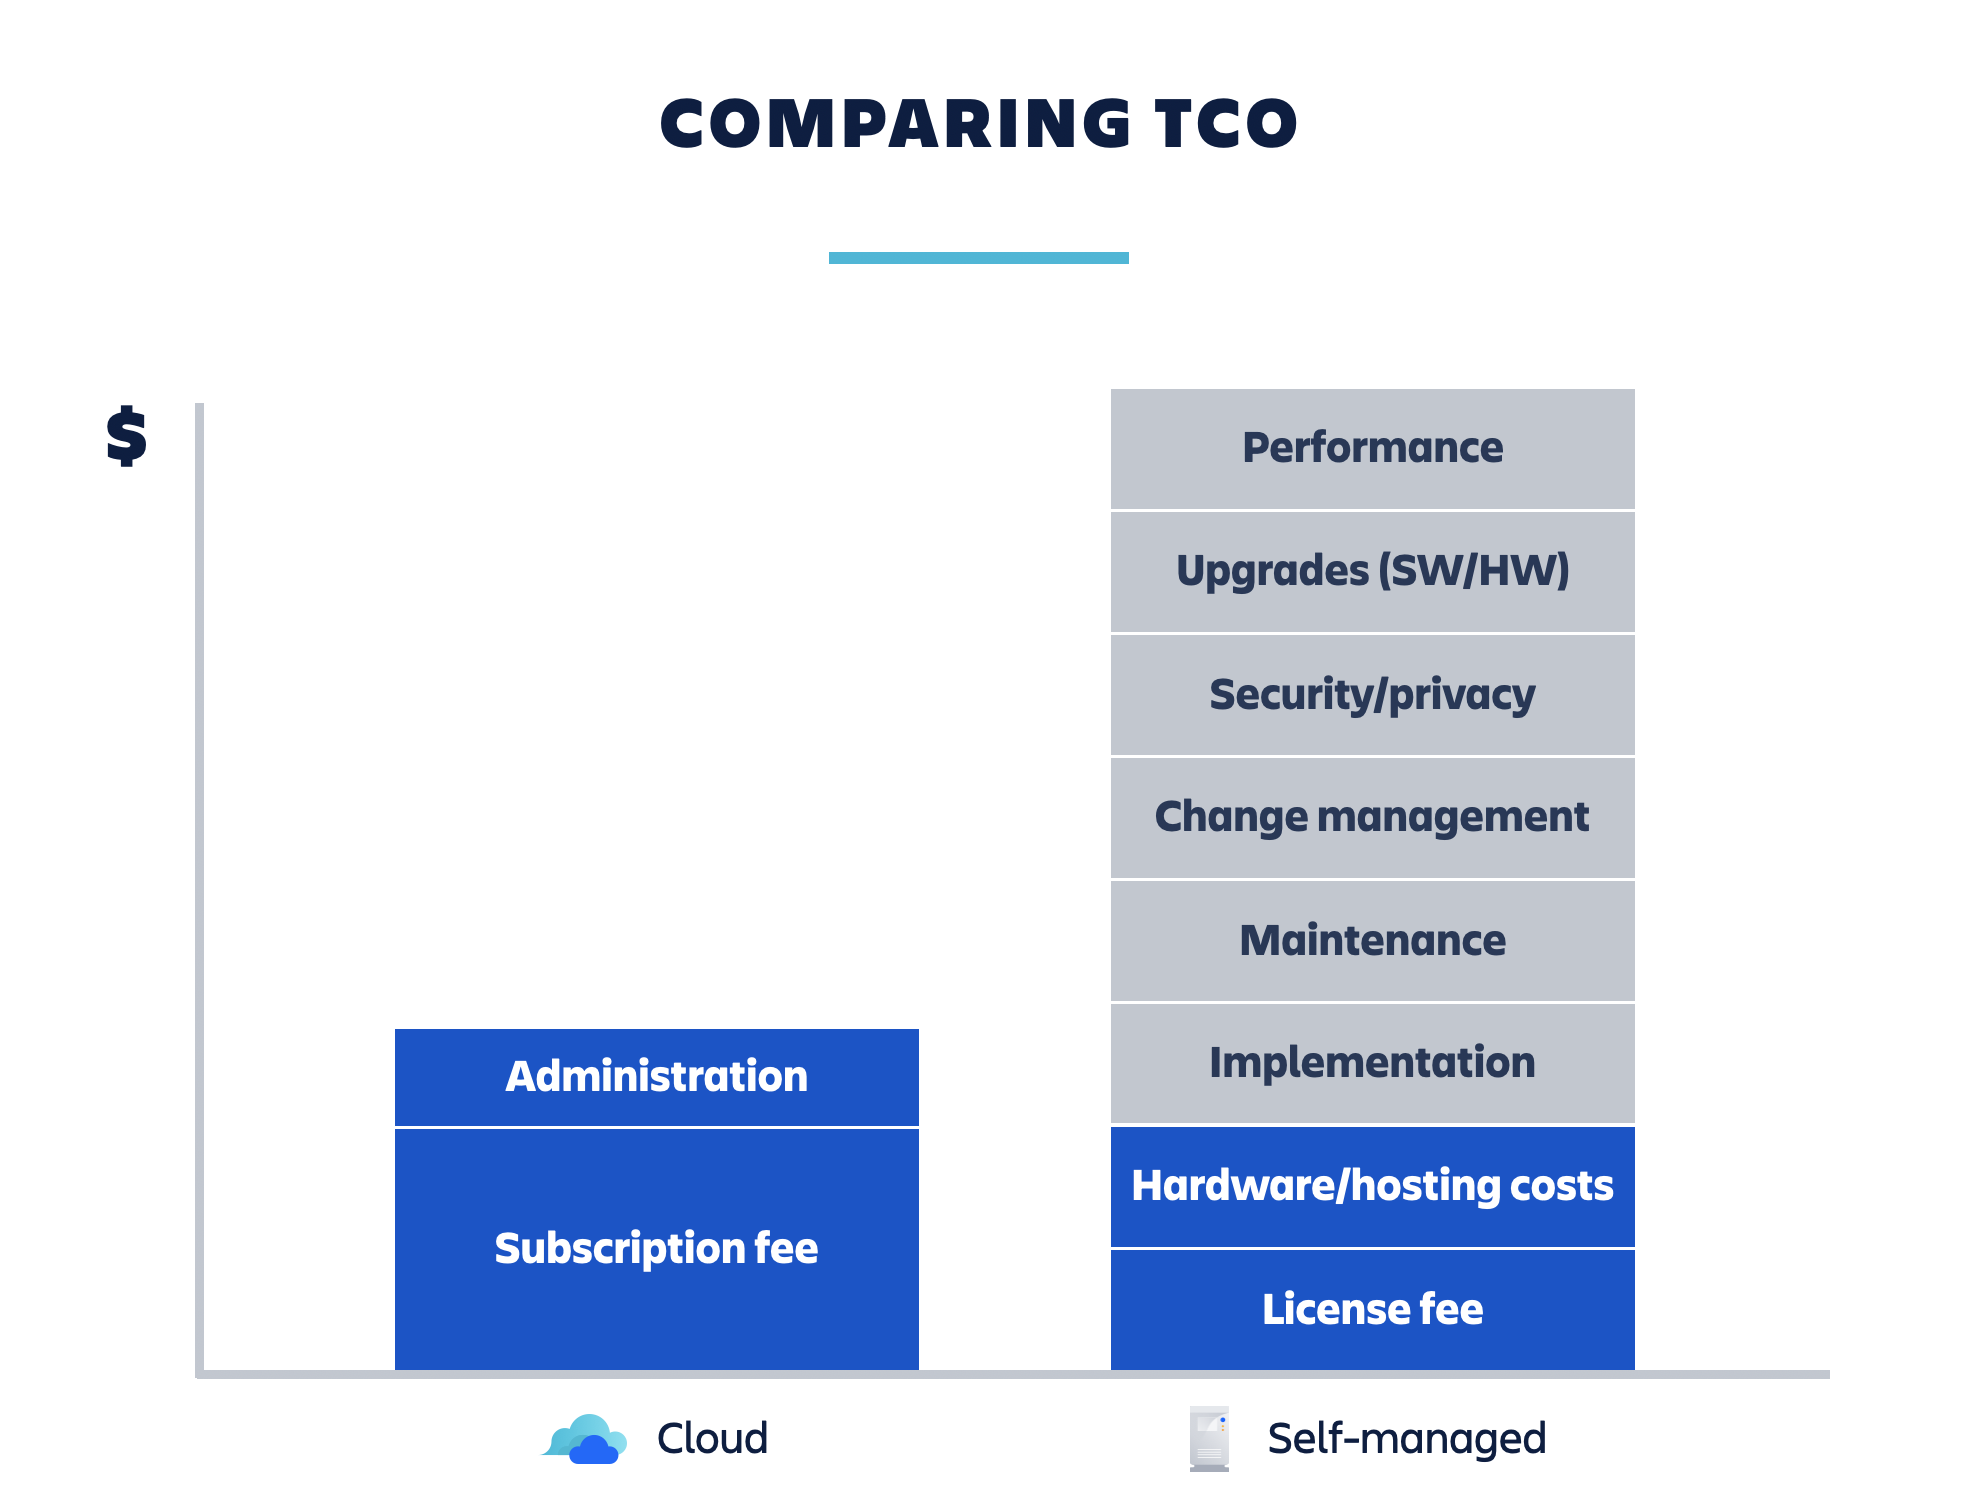 comparing total cost of ownership for self-managed vs cloud delpoyment